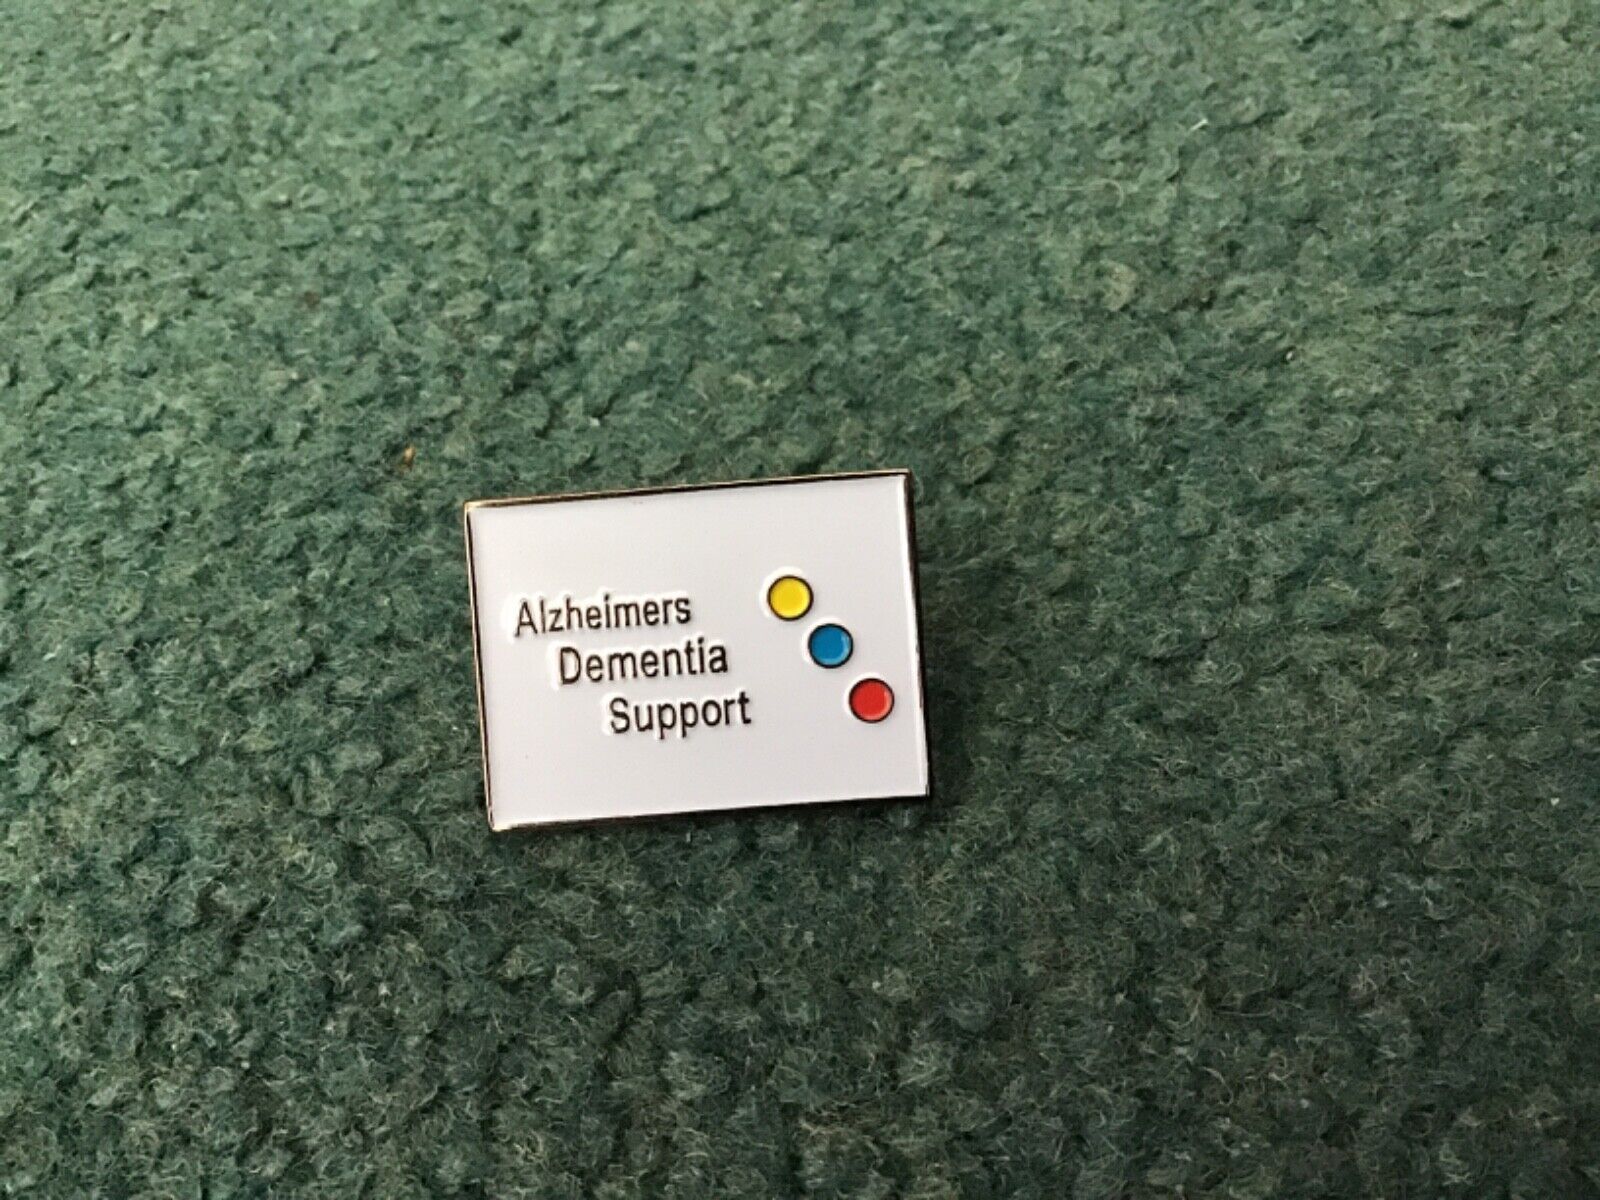 Charity Pin Badge for Alzheimer’s Dementia Support.